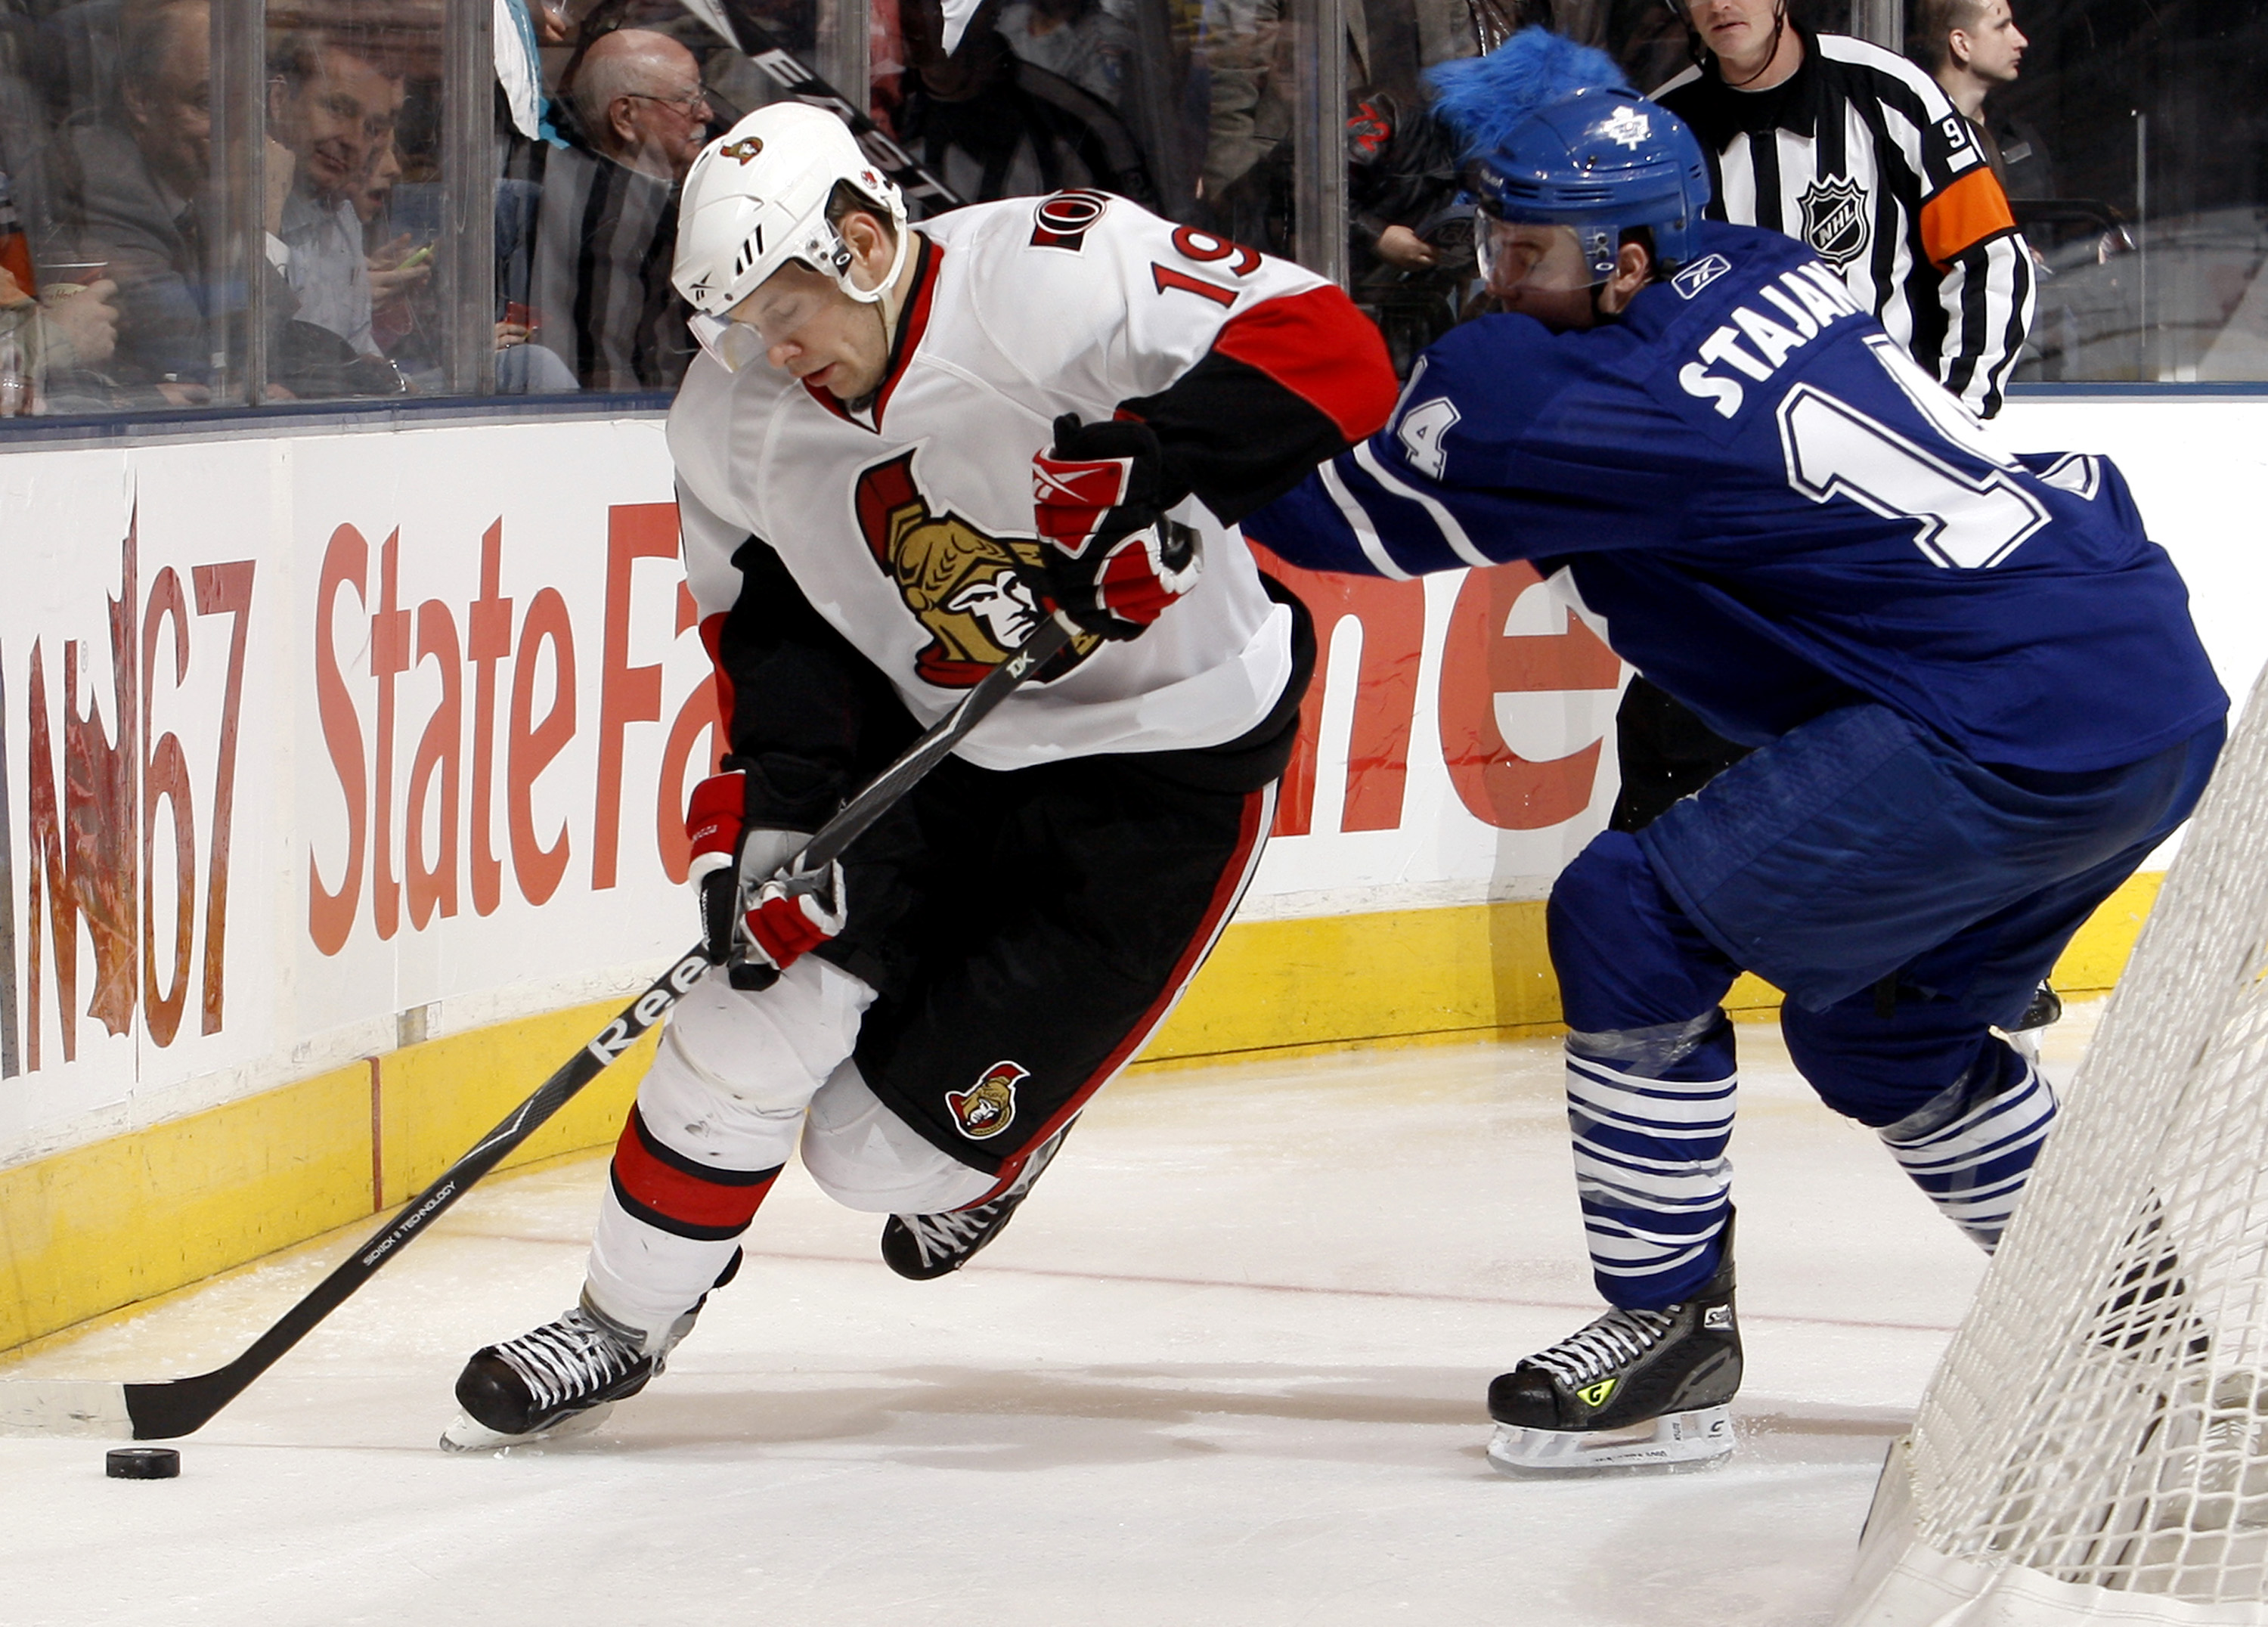 TORONTO - DECEMBER 14:  Matt Stajan #14 of the Toronto Maple Leafs runs into Jason Spezza #19 of the Ottawa Senators during action December 14, 2009 at the Air Canada Centre in Toronto, Ontario, Canada. (Photo by Abelimages/Getty Images)